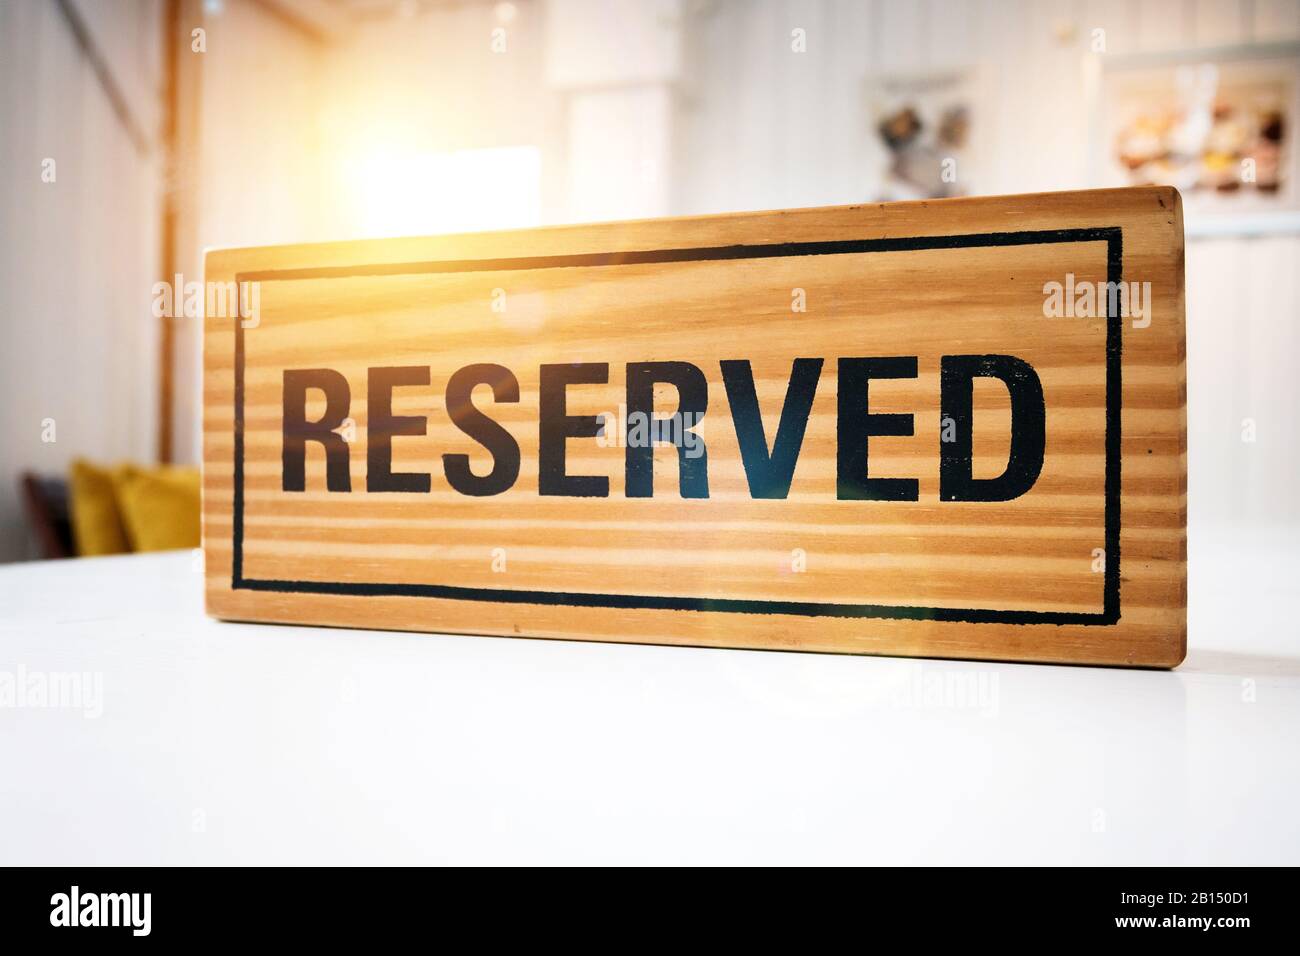 Reservation seat at restaurant for dating on celebrate day concept. Restaurant with reserved wooden sign on white table with cafe decorate places Stock Photo